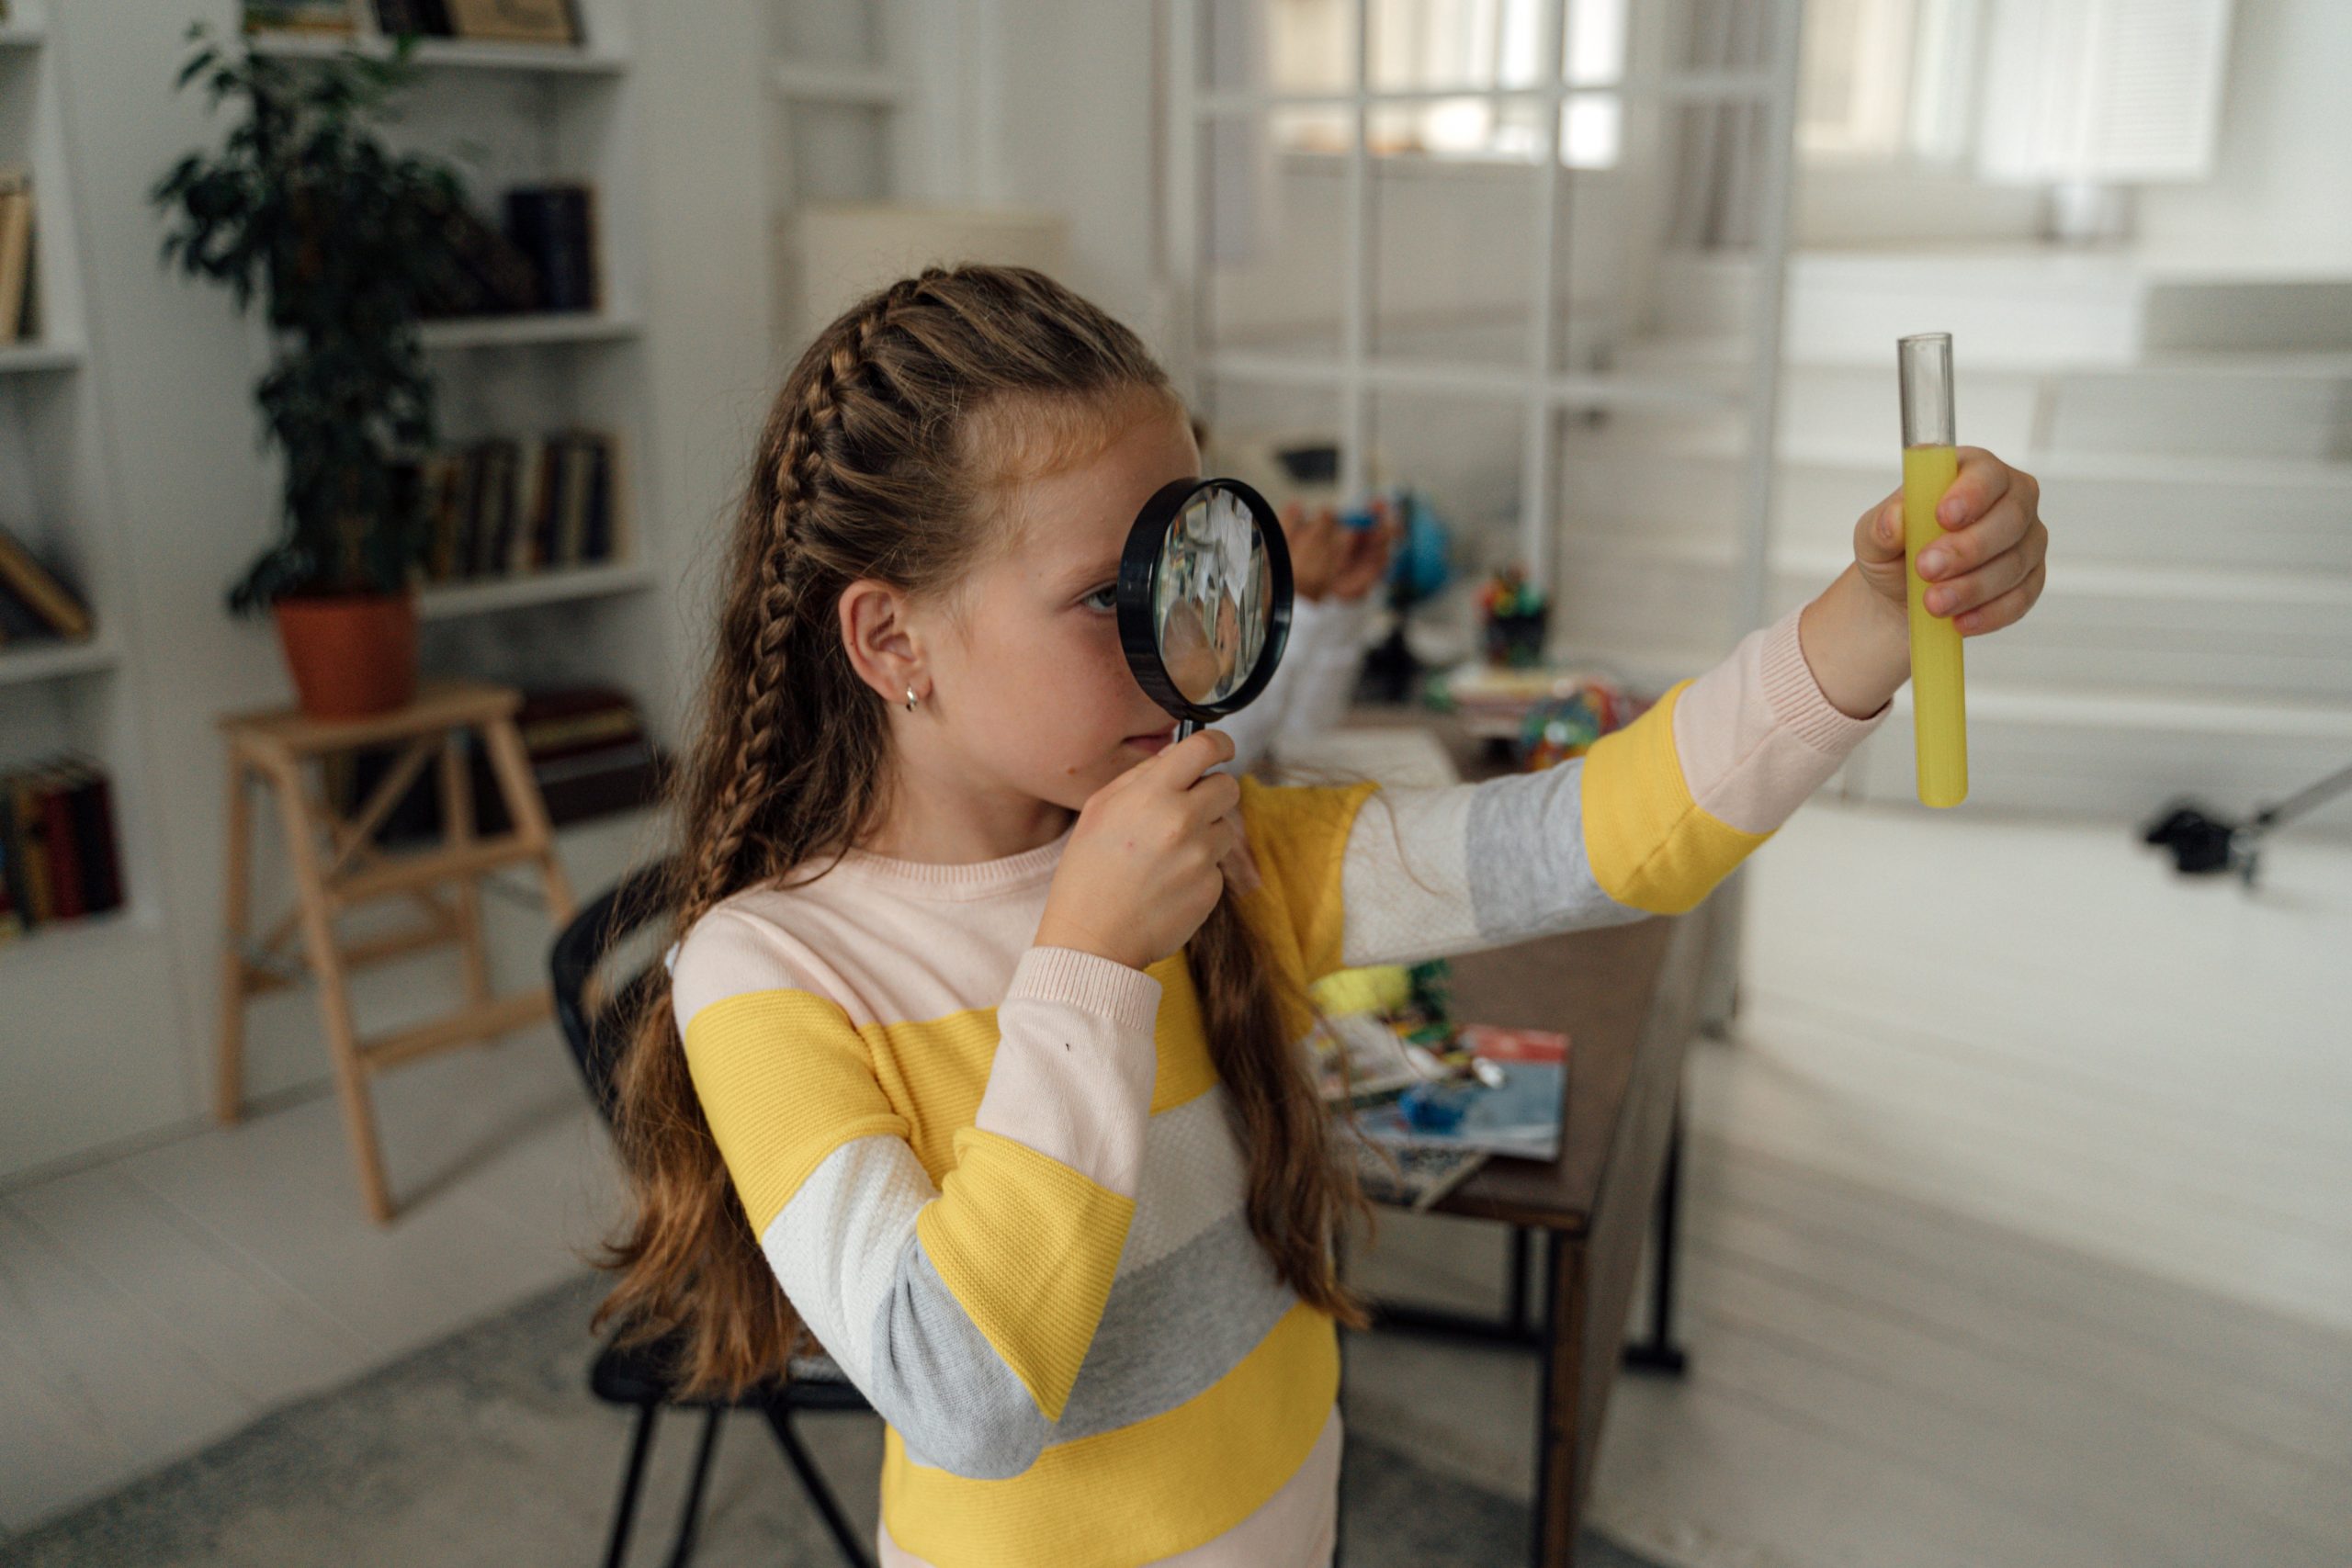 Citizen Science in action: a Child with a magnifying glass inspecting a test tube with a yellow liquid